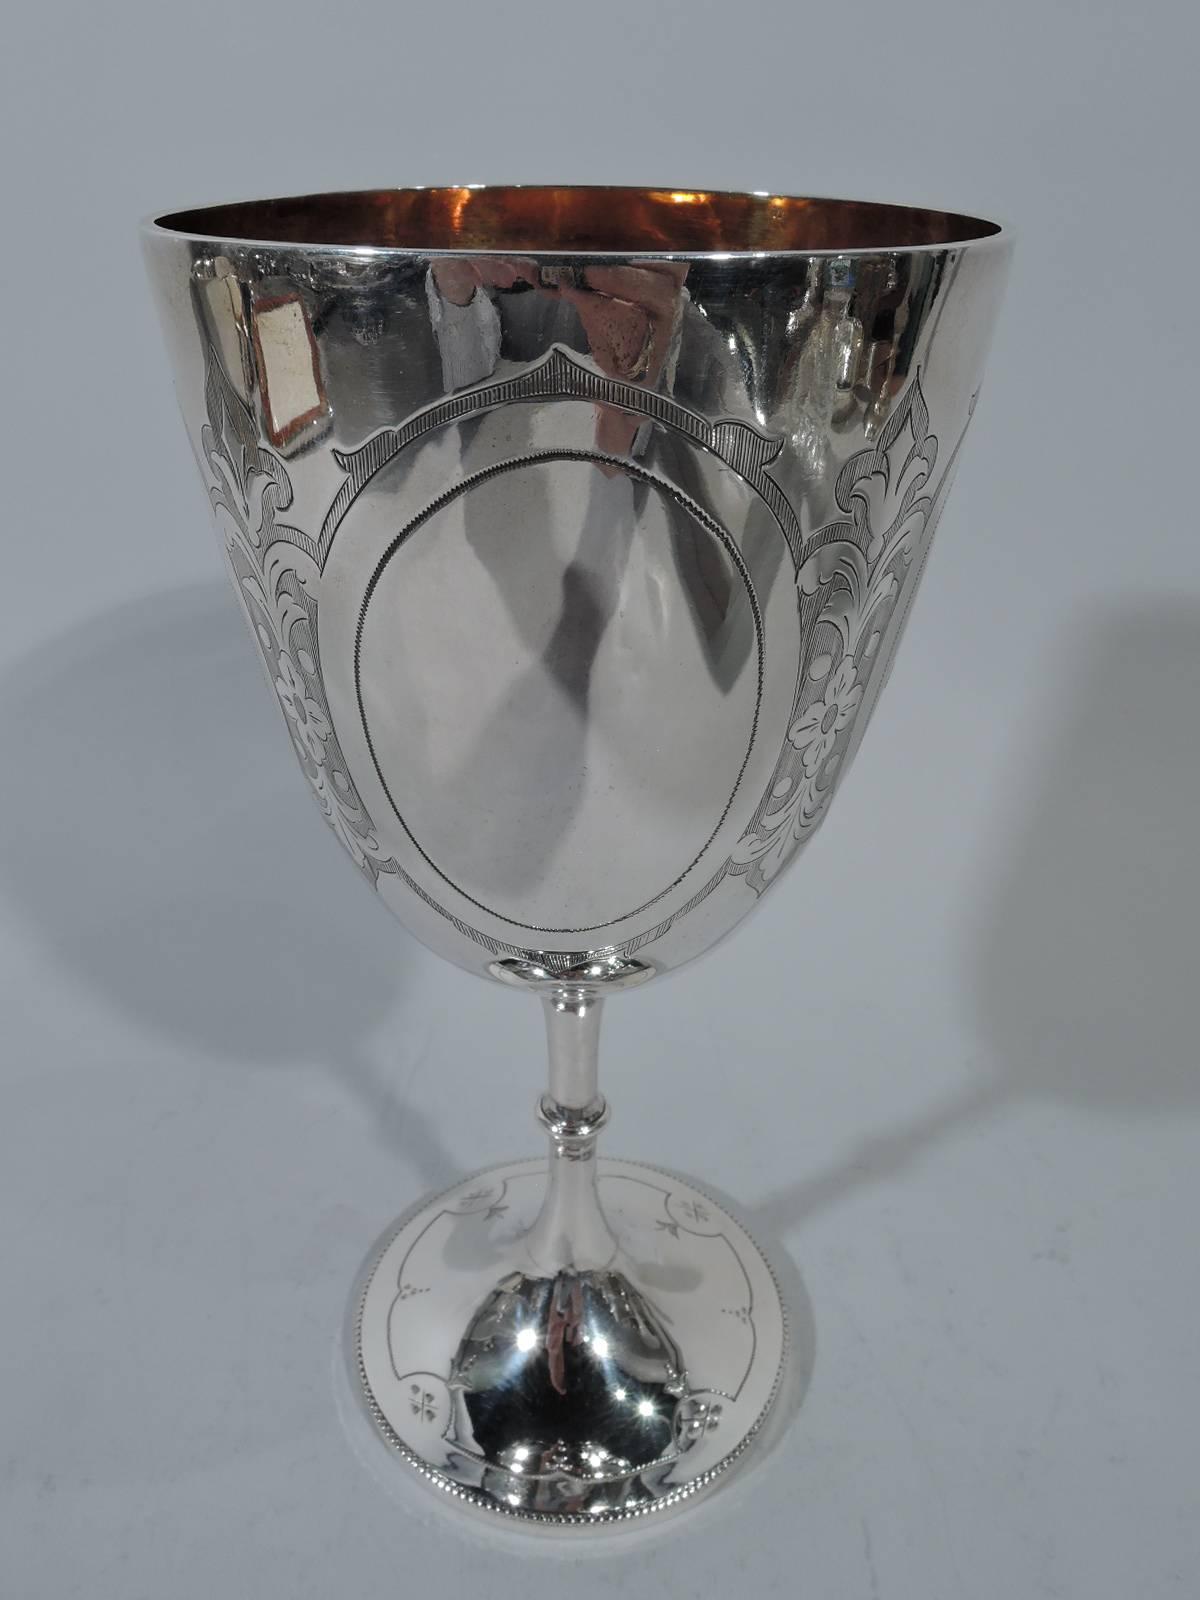 Victorian sterling silver goblet. Made by John & Henry Lias in London in 1875. Tapering bowl on knopped stamp on raised foot. Stylized ornament on shaded ground. Four oval frames joined by flowers. Two frames inset with bouquets; other two vacant.